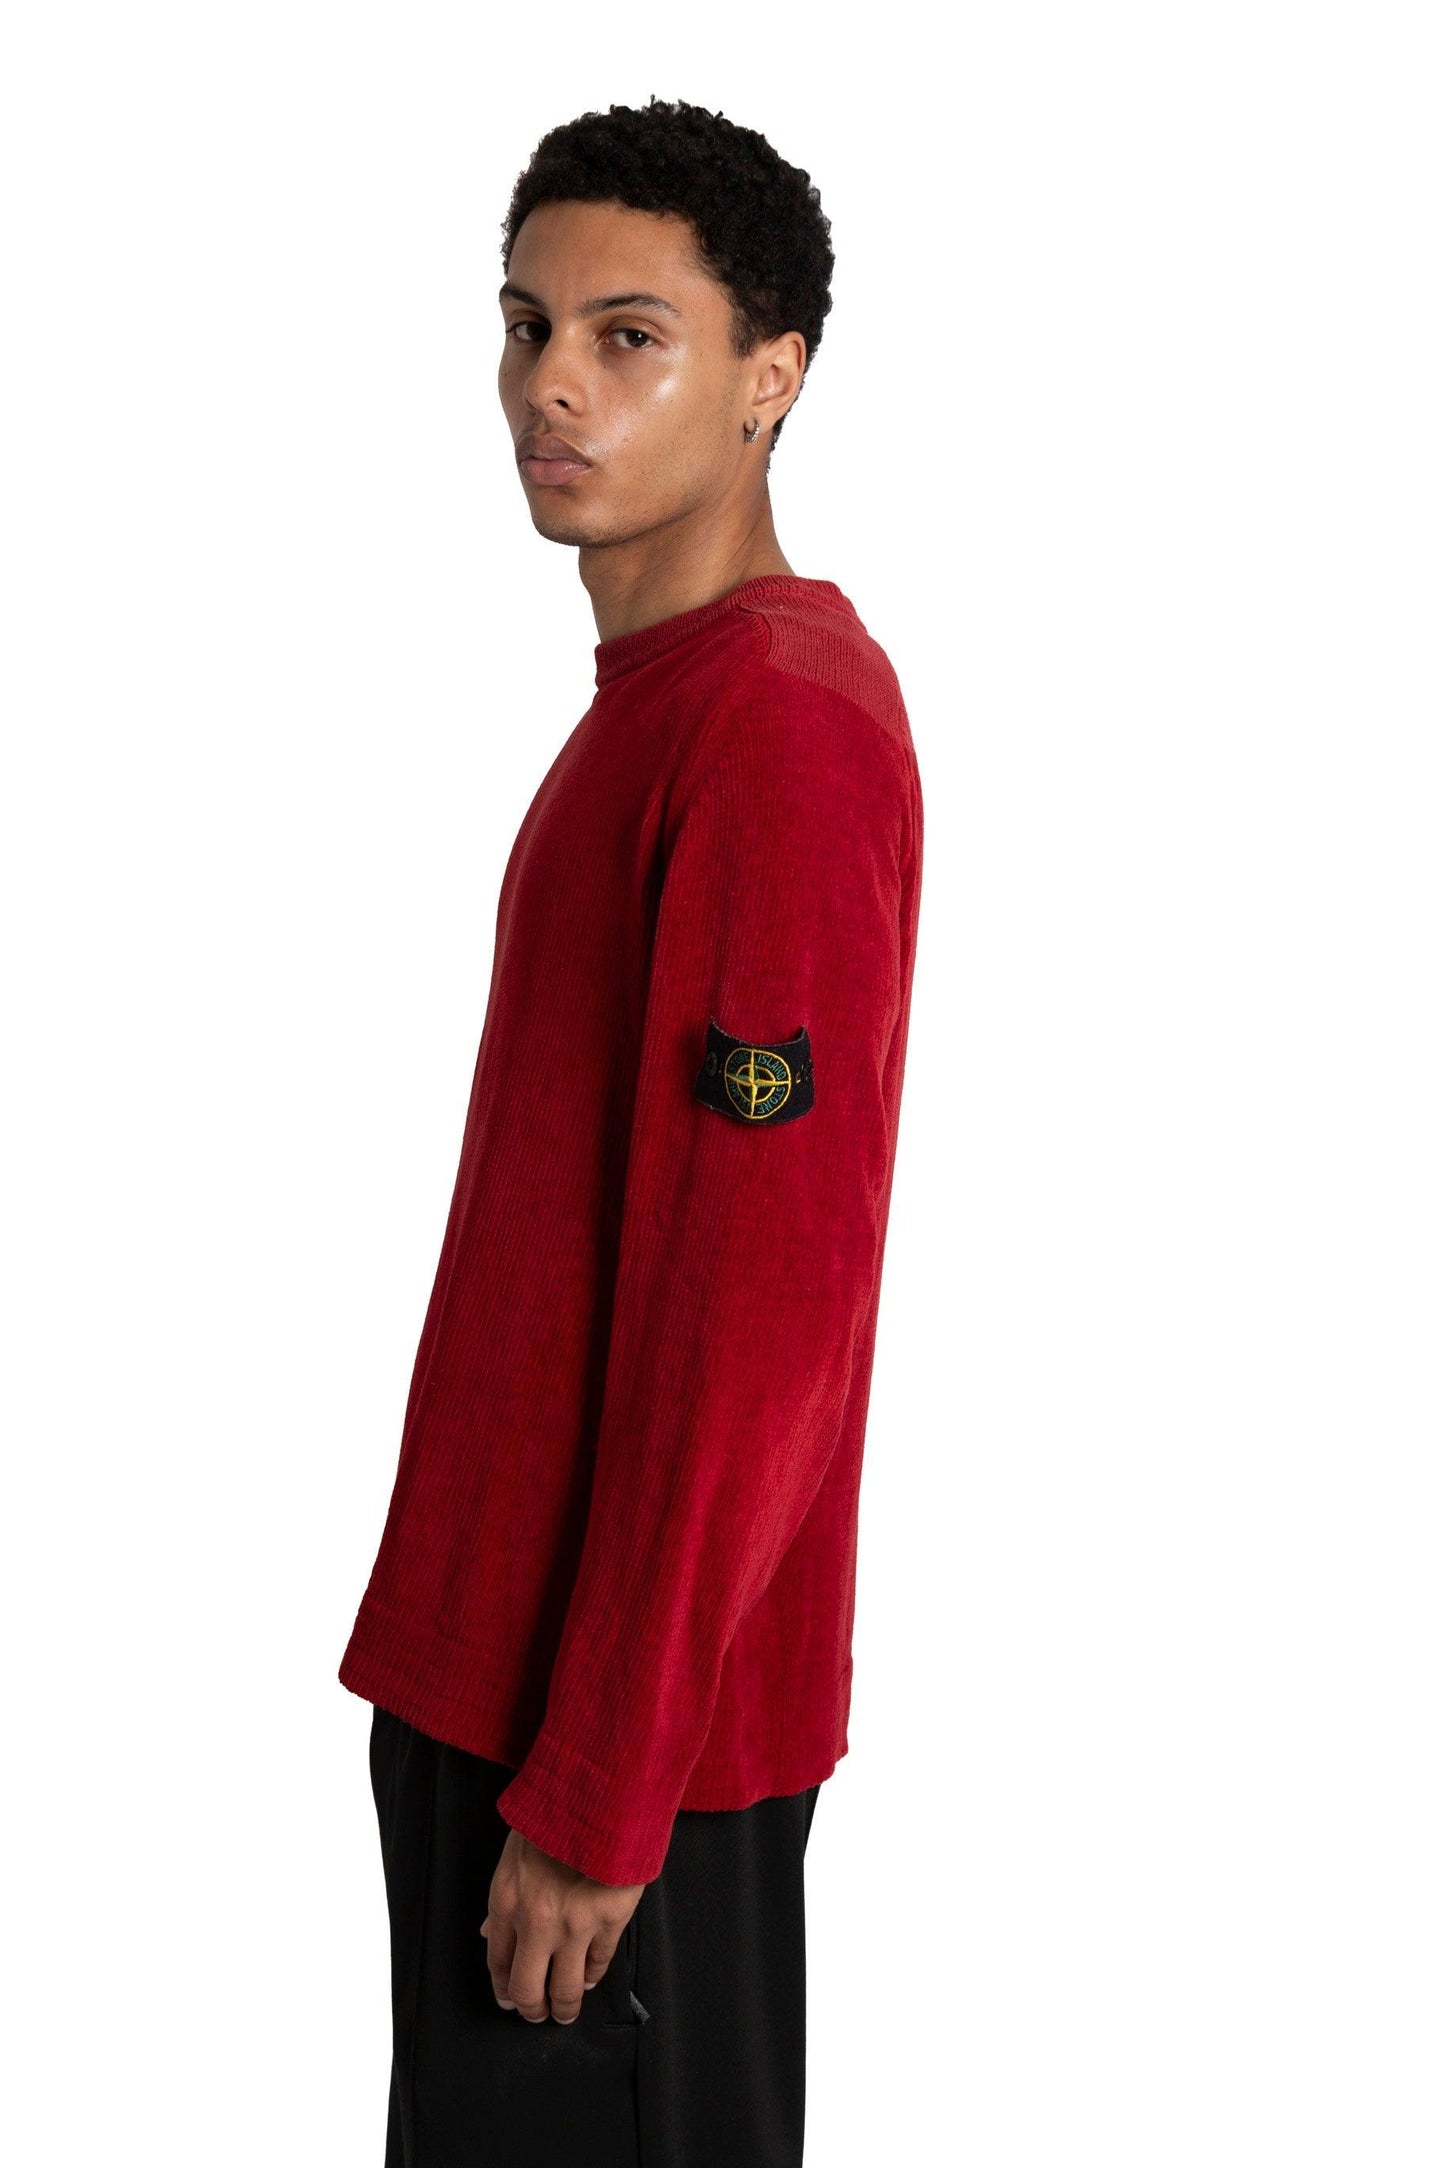 Stone Island S/S 2001 Chenille Knit Sweater - Known Source